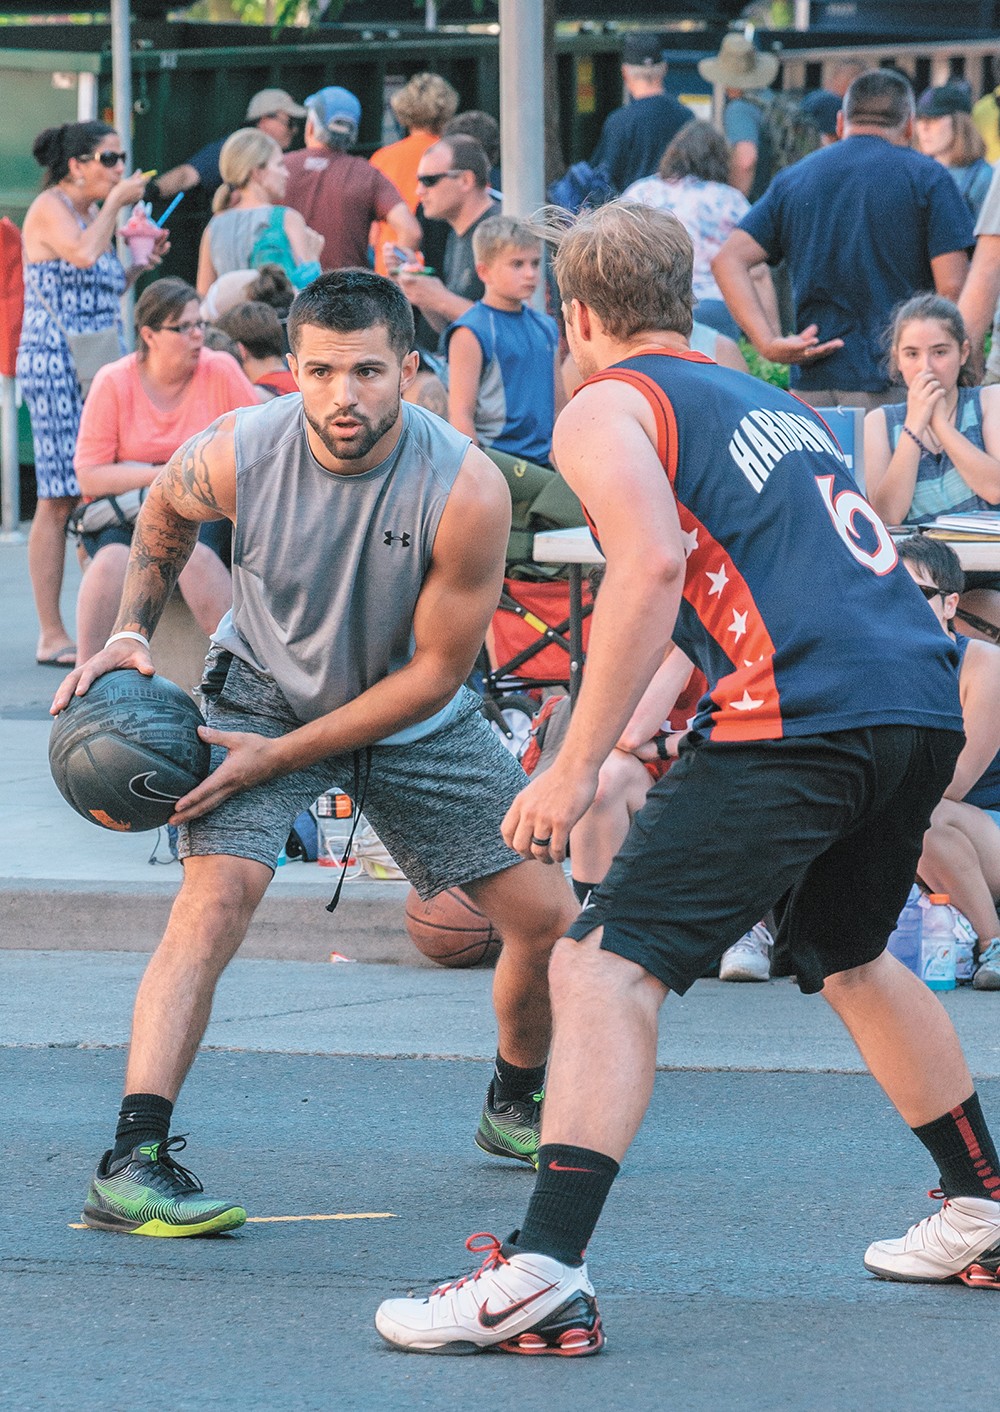 How to do Hoopfest right, whether you're a player or spectator